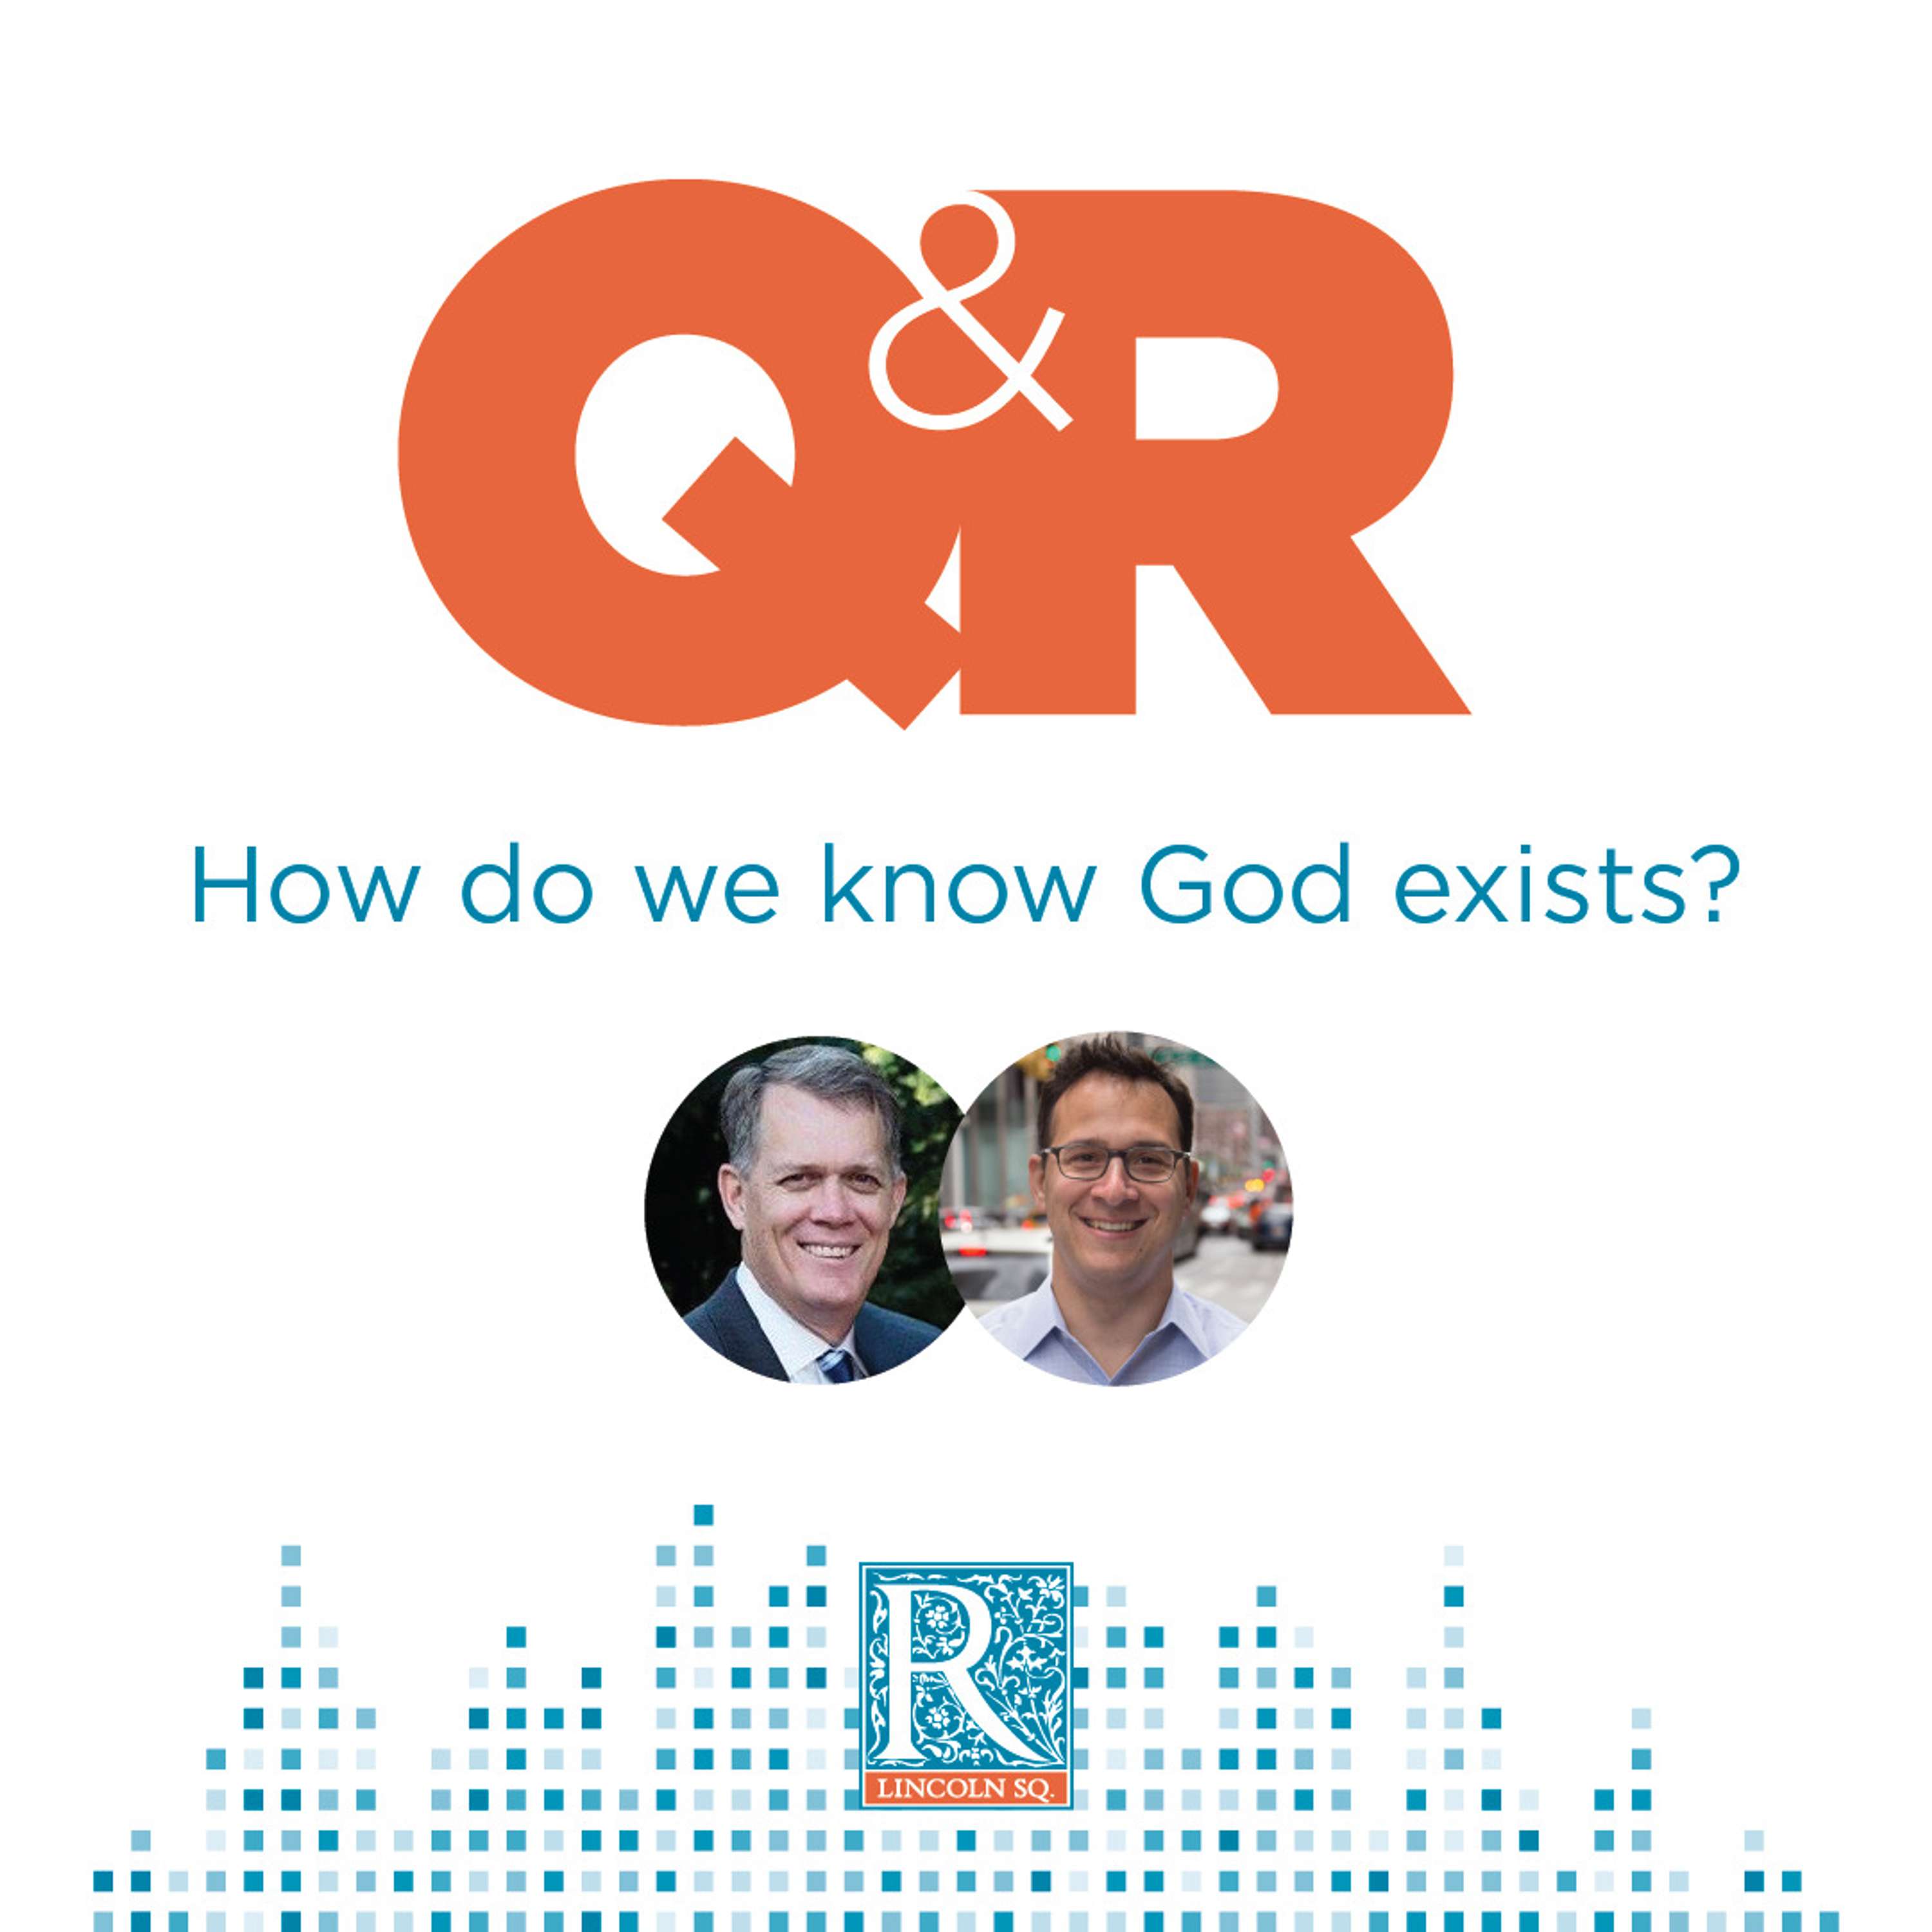 How do we know God exists?